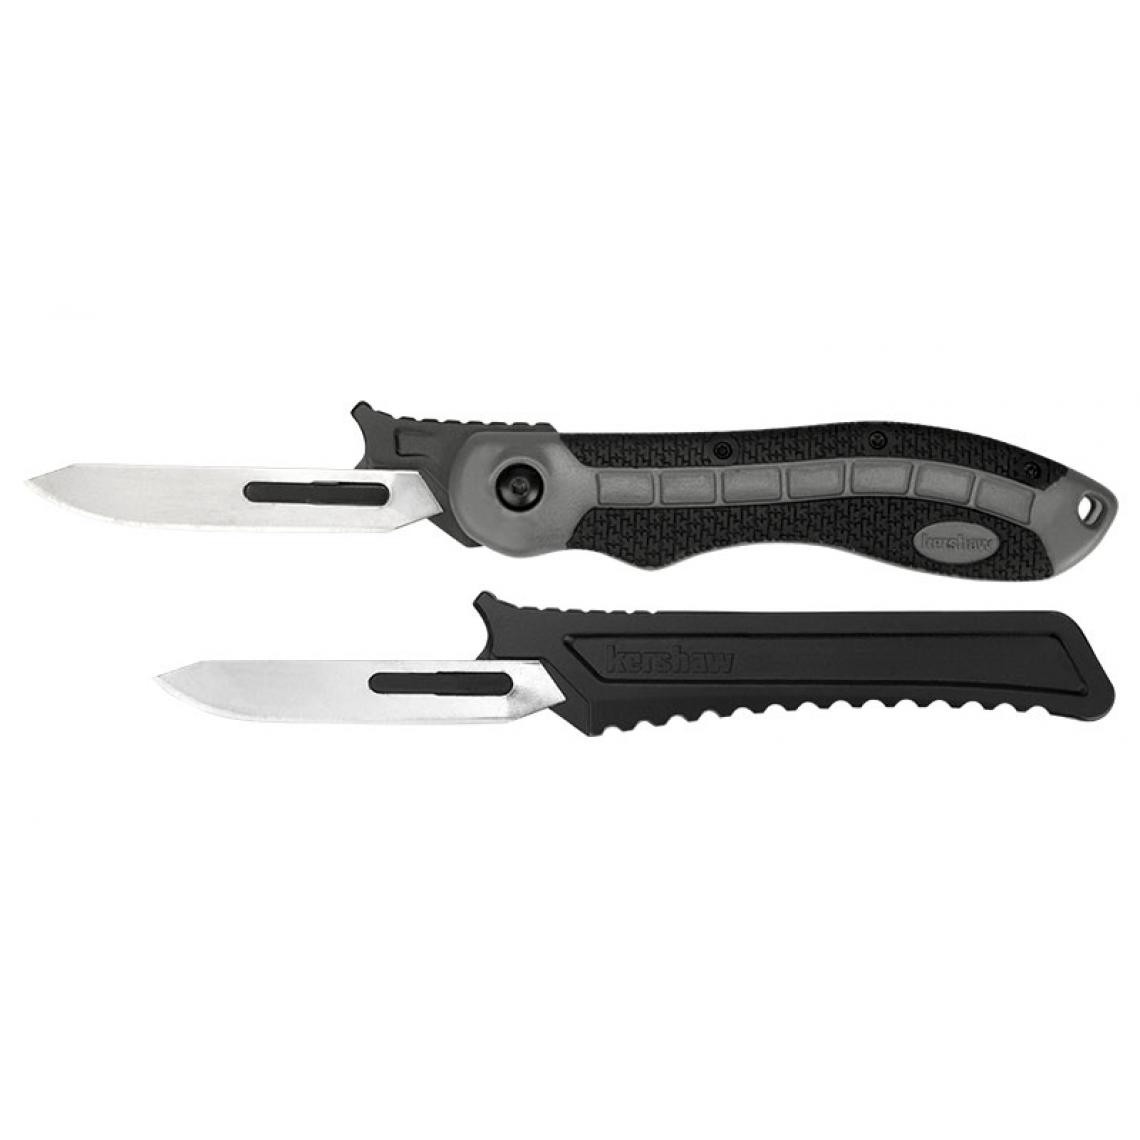 Divers Marques - KERSHAW - KW1890 - KERSHAW - LONEROCK - Outils de coupe